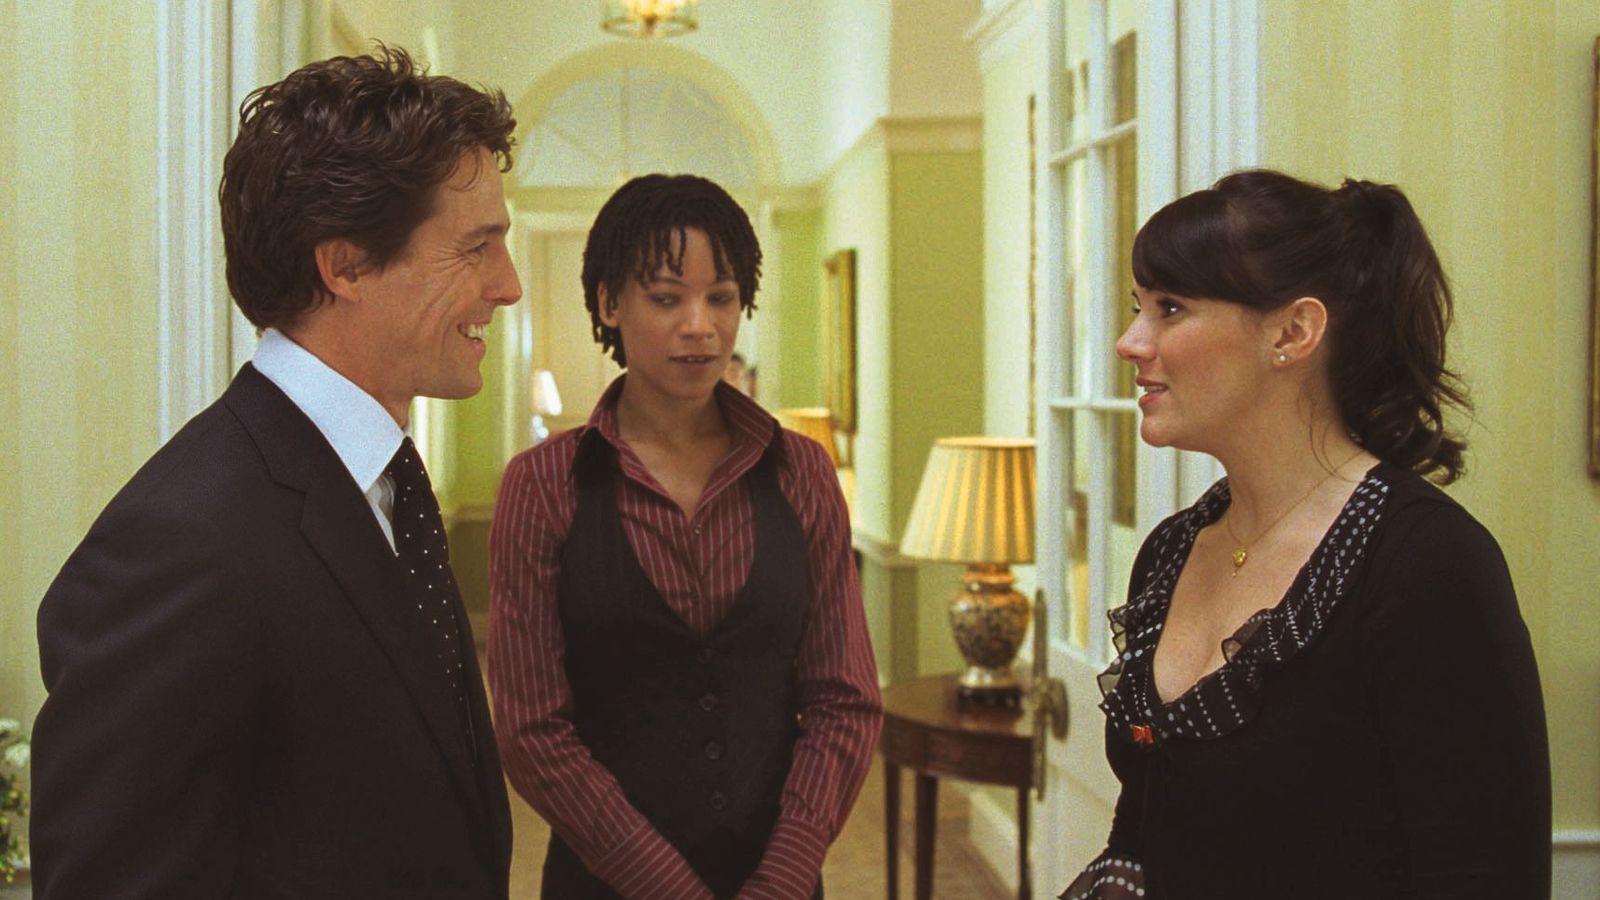 Parts of Love Actually make me feel 'a bit stupid', screenwriter Richard Curtis says